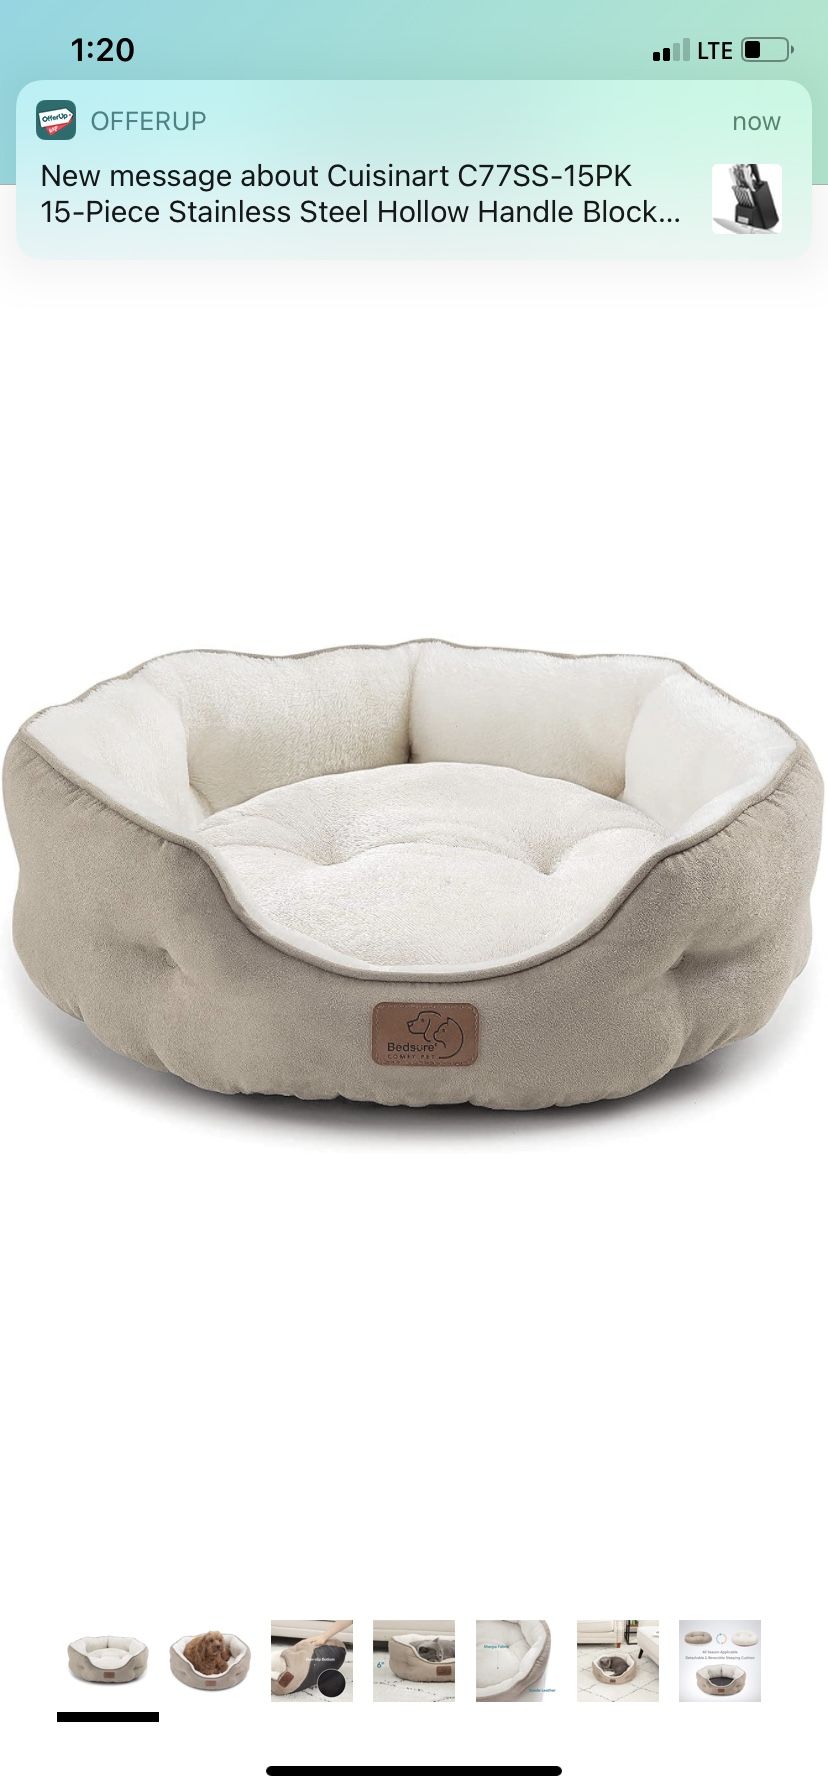 Bedsure Small Dog Bed for Small Dogs Washable - Round Cat Beds for Indoor Cats, Round Pet Bed for Puppy and Kitten with Slip-Resistant Bottom, 20 Inch